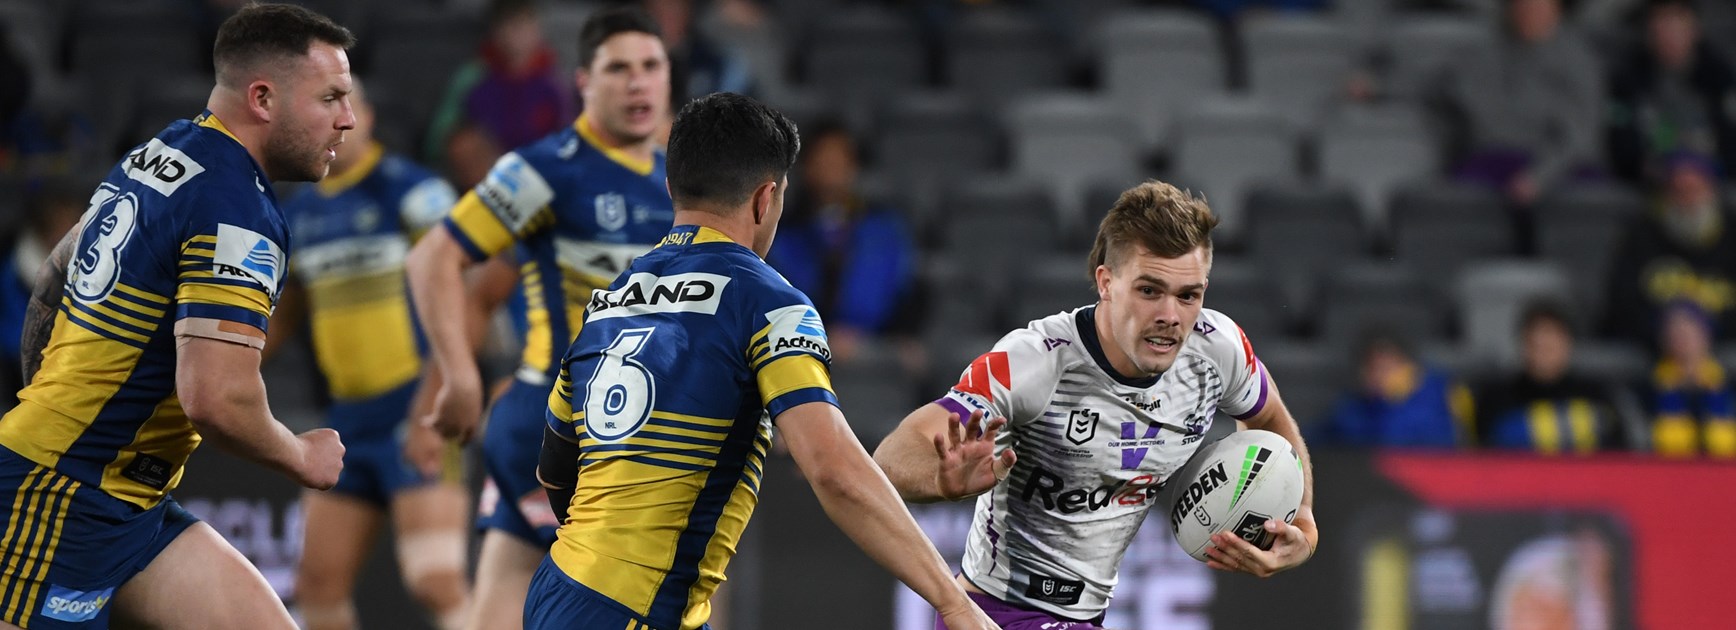 Late Mail - Qualifying Final v Eels